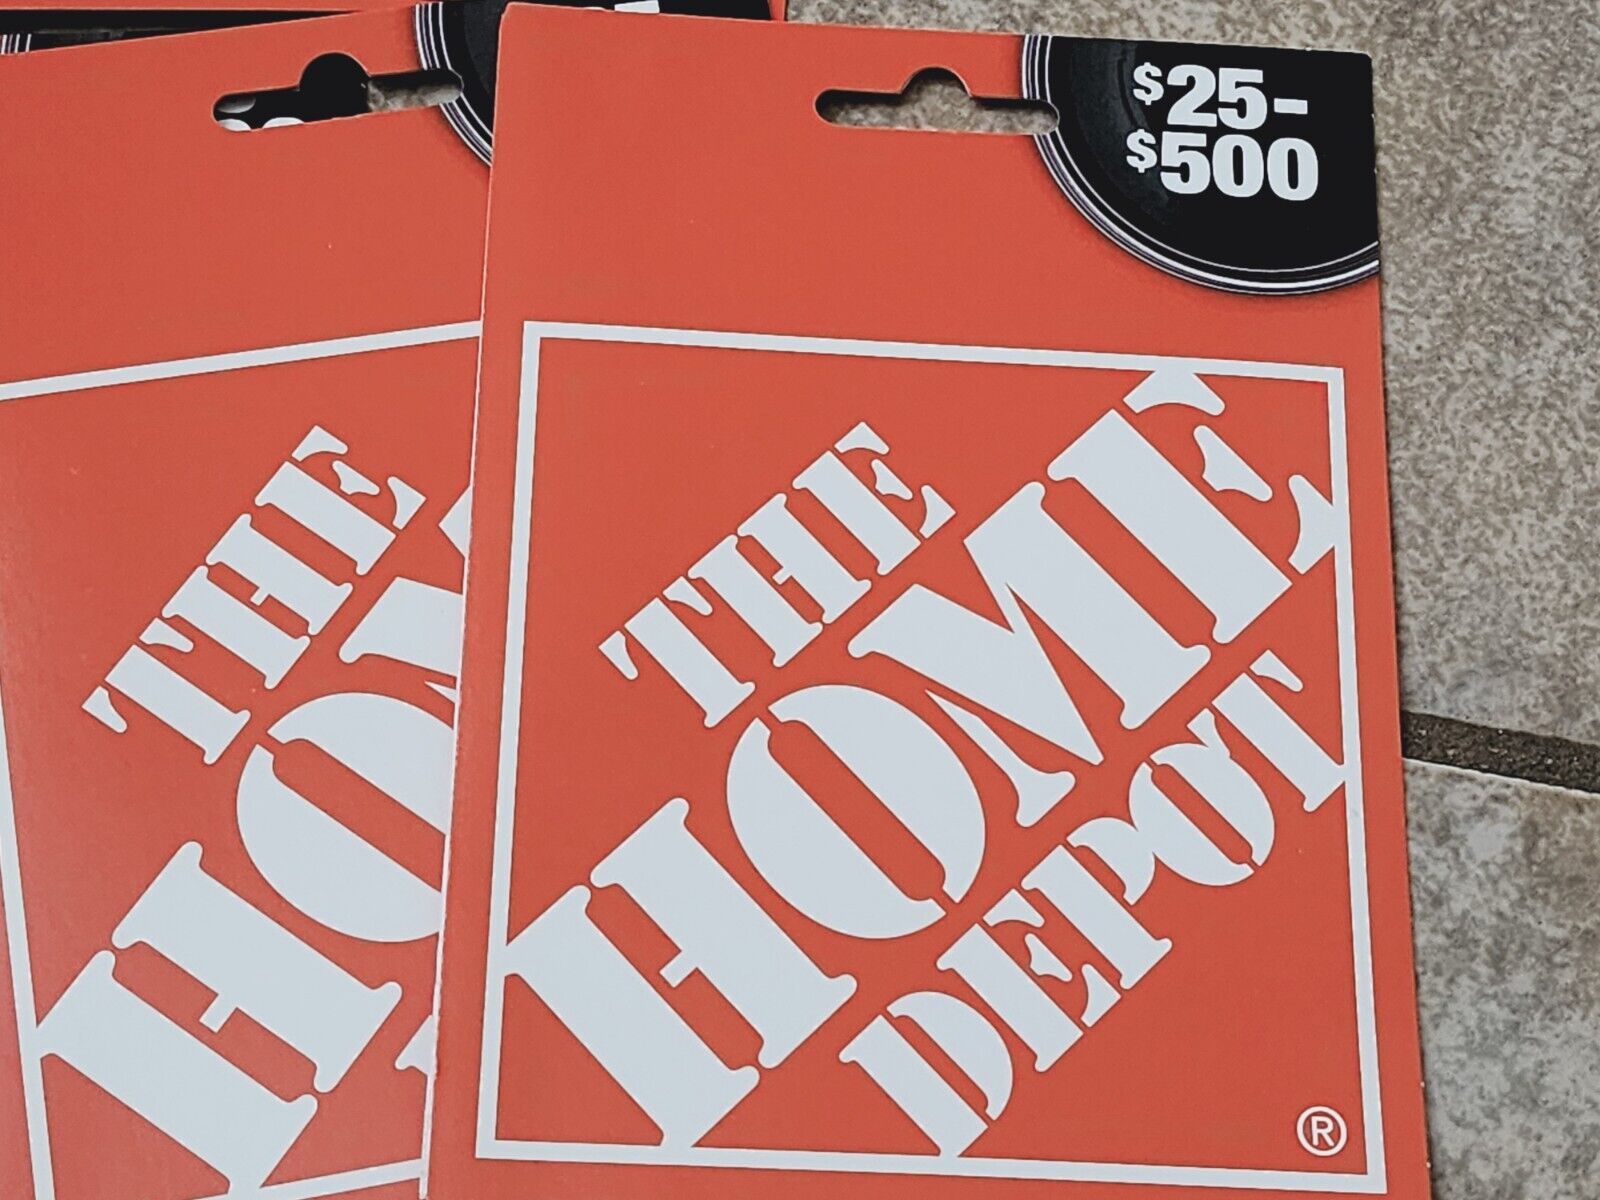 NOT ACTIVATED/NO BALANCE The Home Depot $25-$500 physical gift card lot of 10